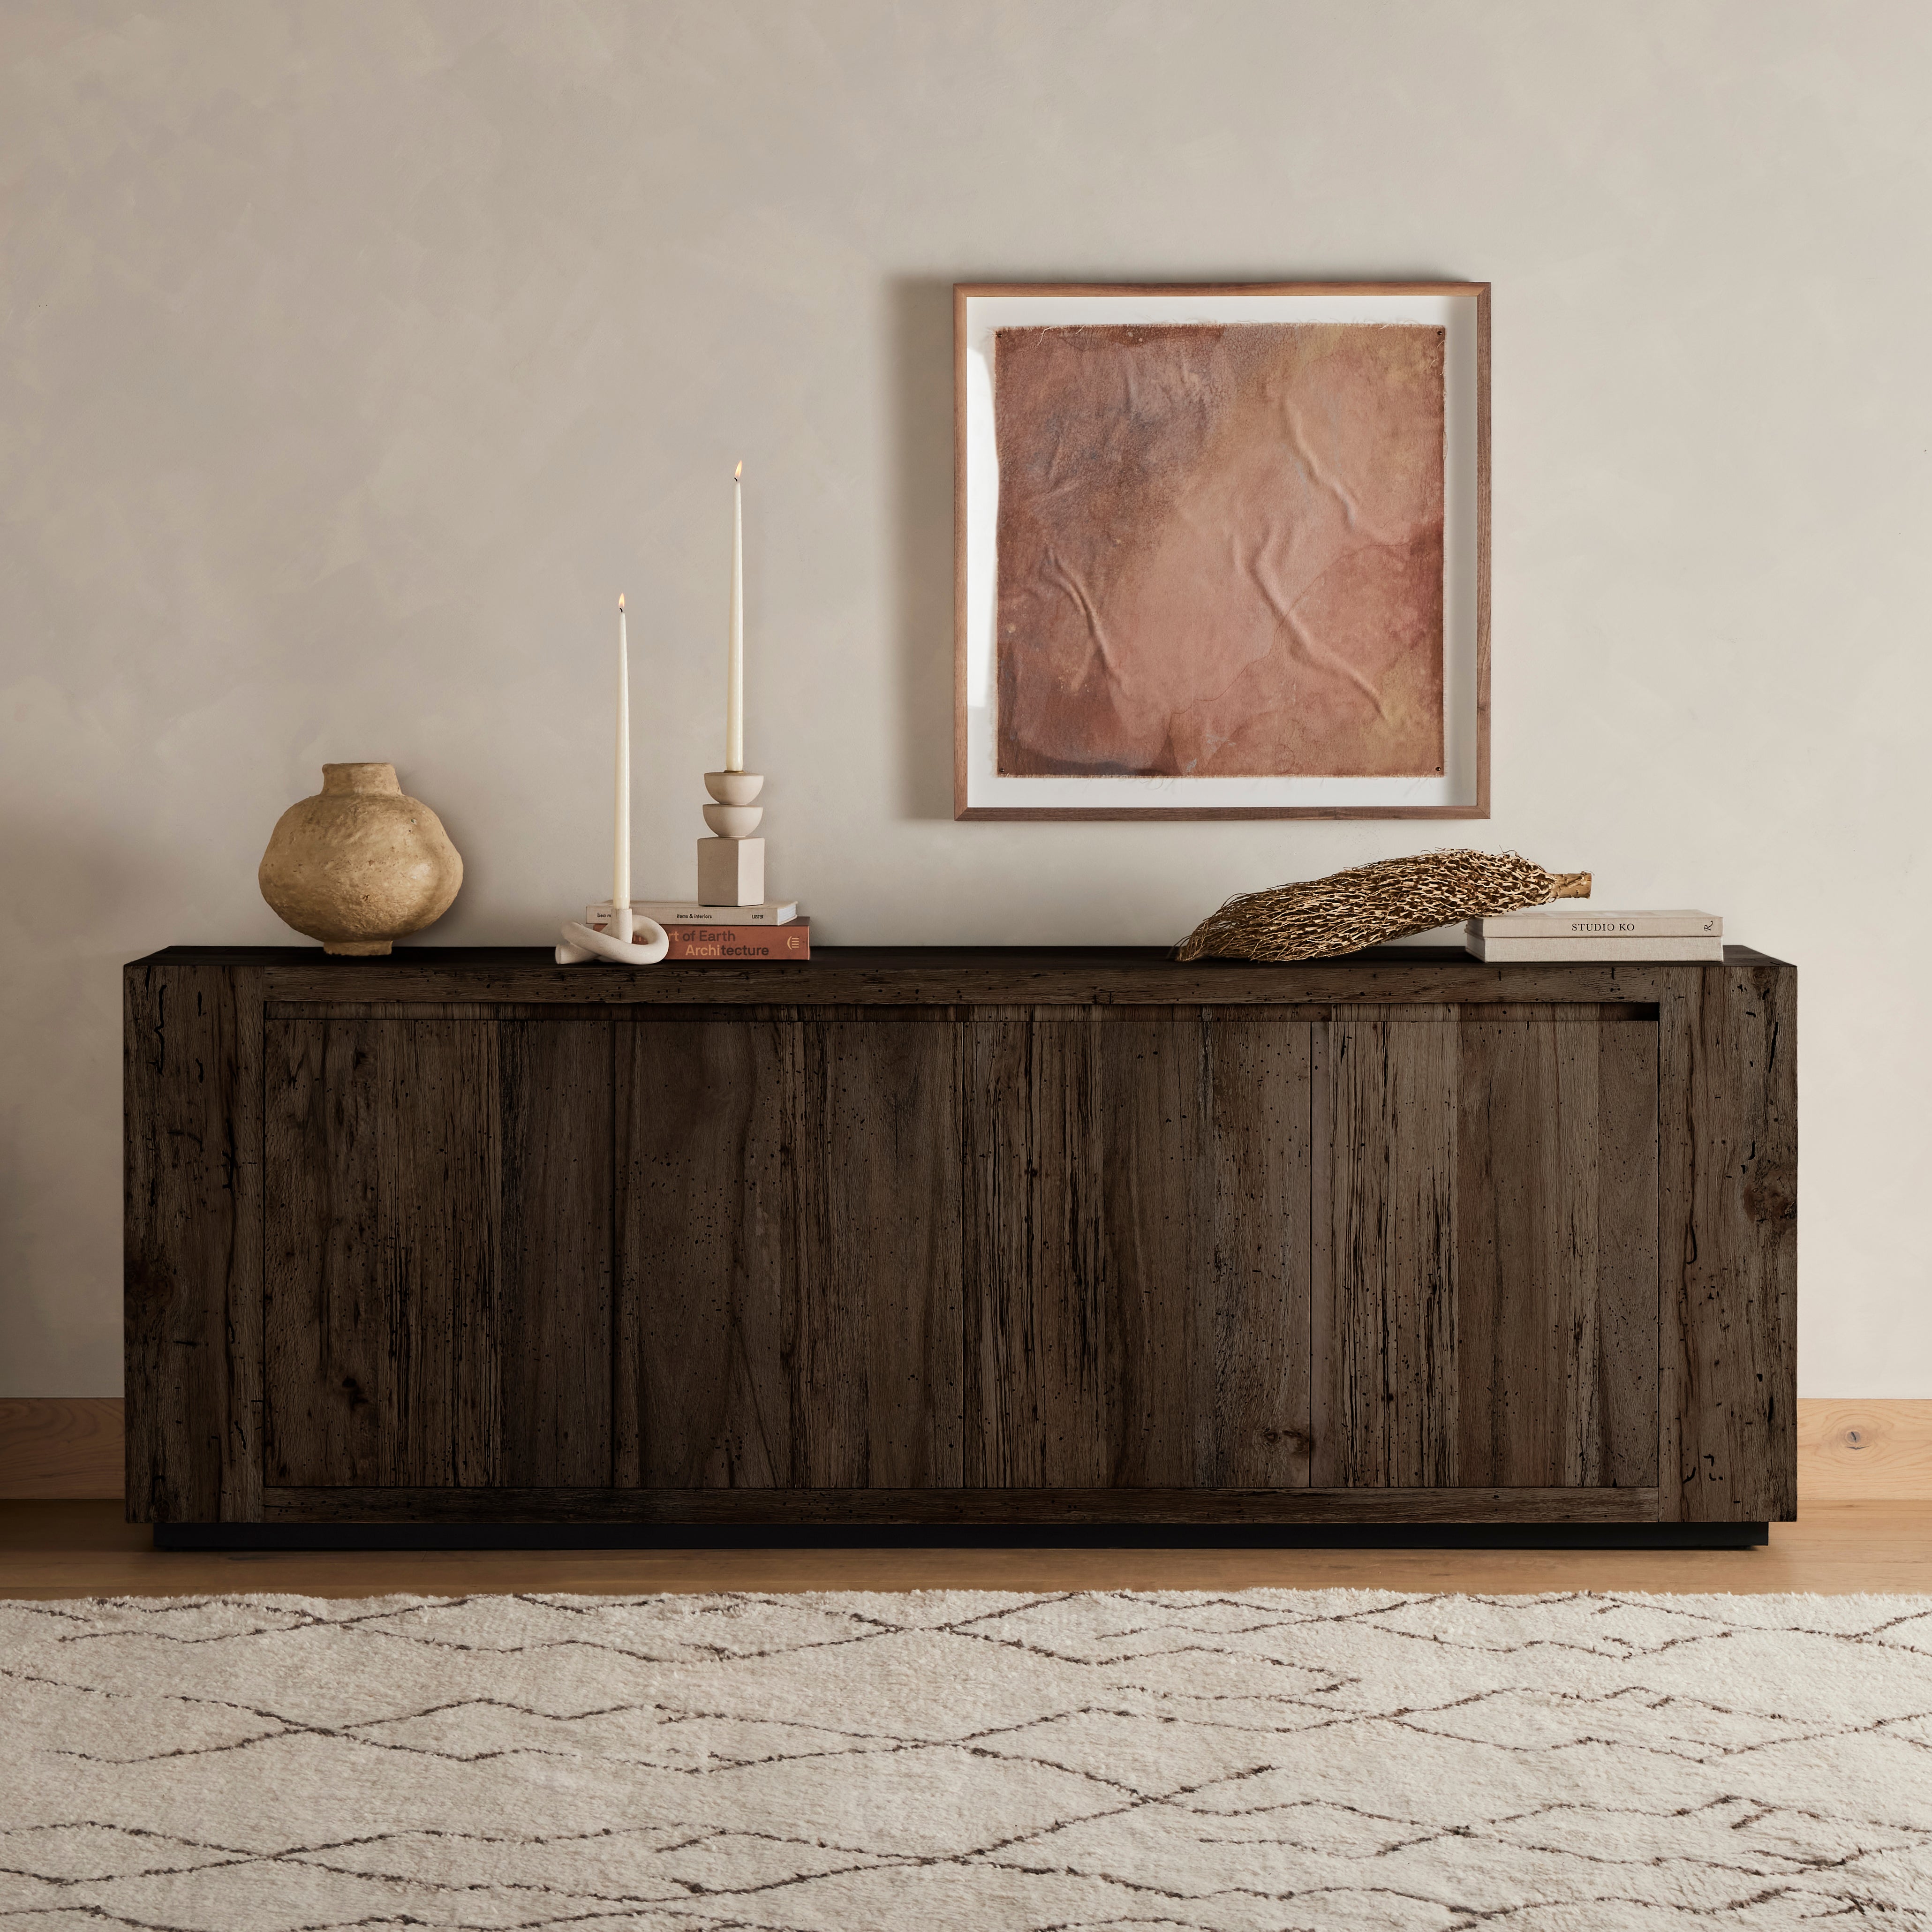 Made from thick-cut oak veneer with a faux rustic finish made to emulate wormwood, this low, large-scale sideboard features chunky squared legs and dovetail joinery detailing. Amethyst Home provides interior design, new home construction design consulting, vintage area rugs, and lighting in the Boston metro area.